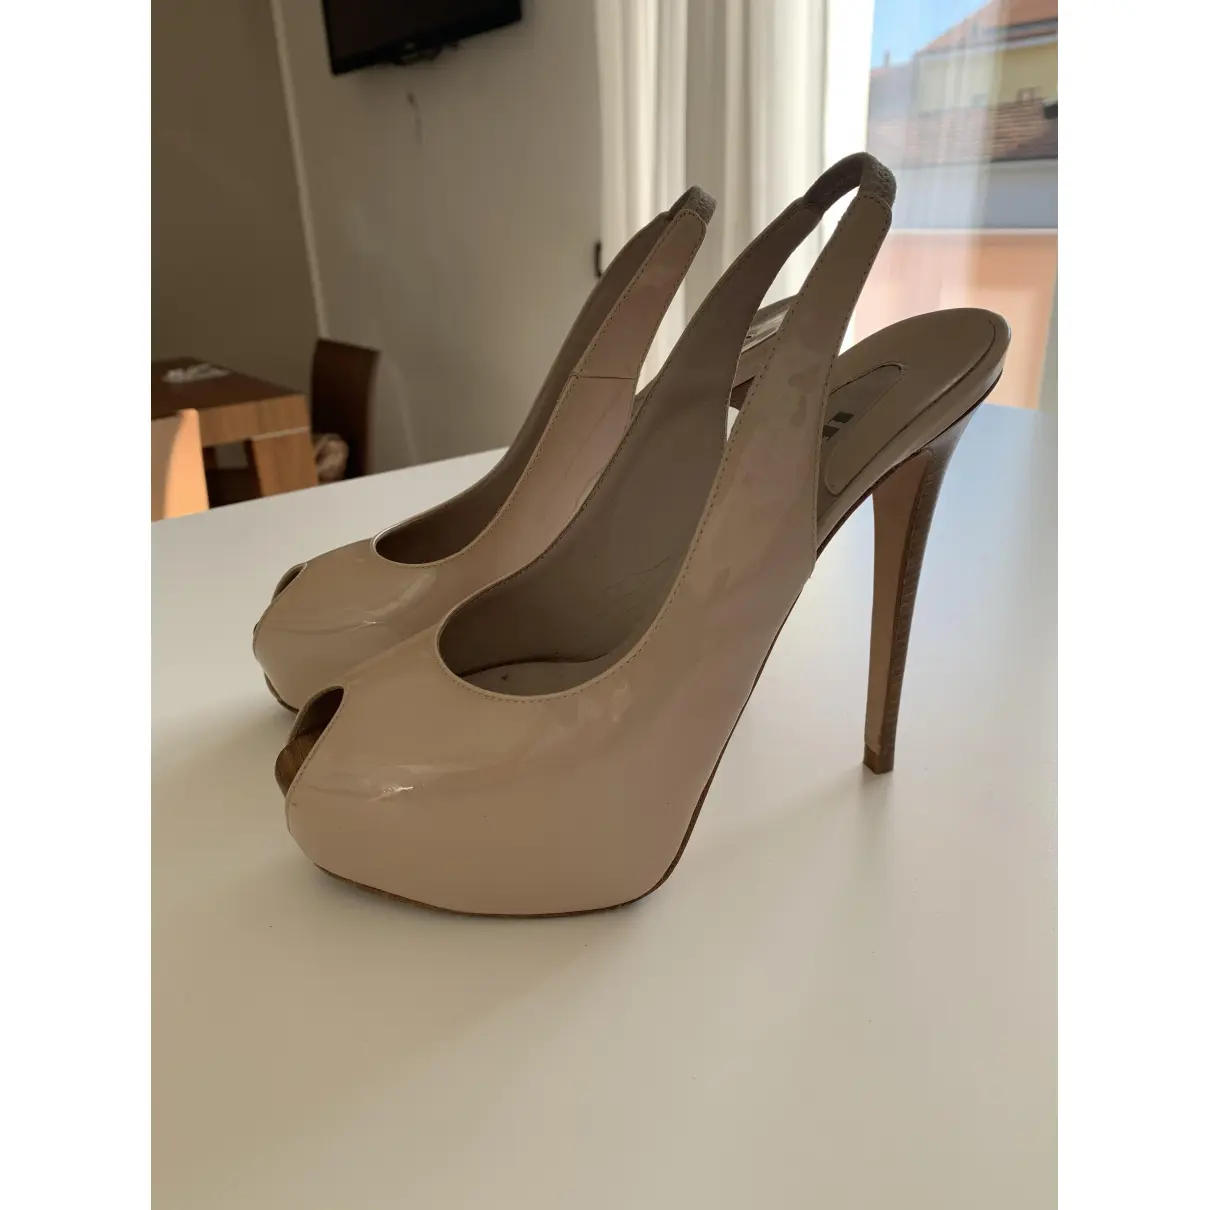 Buy Le Silla Patent leather heels online